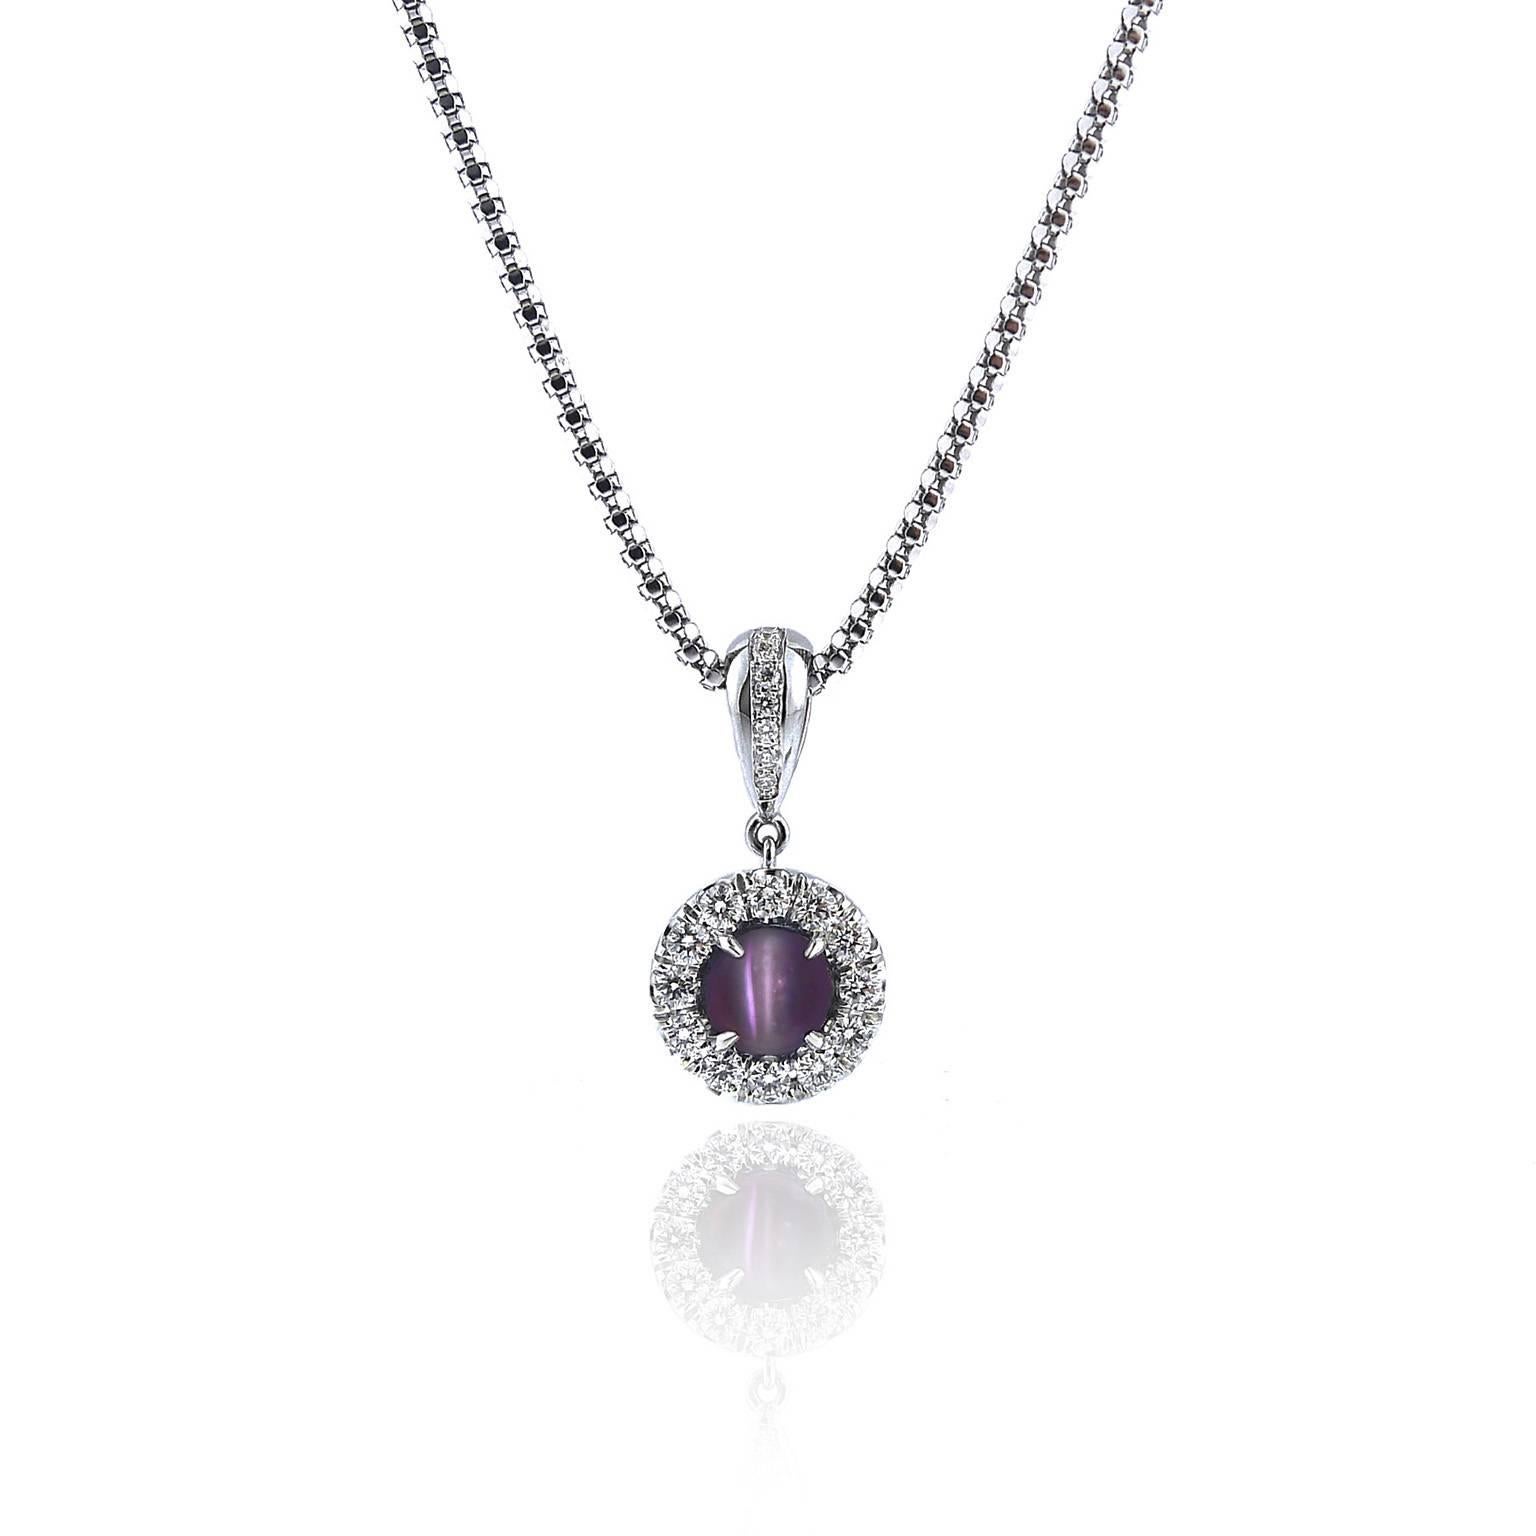 This pendant contains a 1.63 carat round cat's eye alexandrite with a fine bluish-green to purplish-red color change and strong eye. It is of Brazilian origin. There is a matching cat's eye alexandrite on our site whose stone is from the same lot as